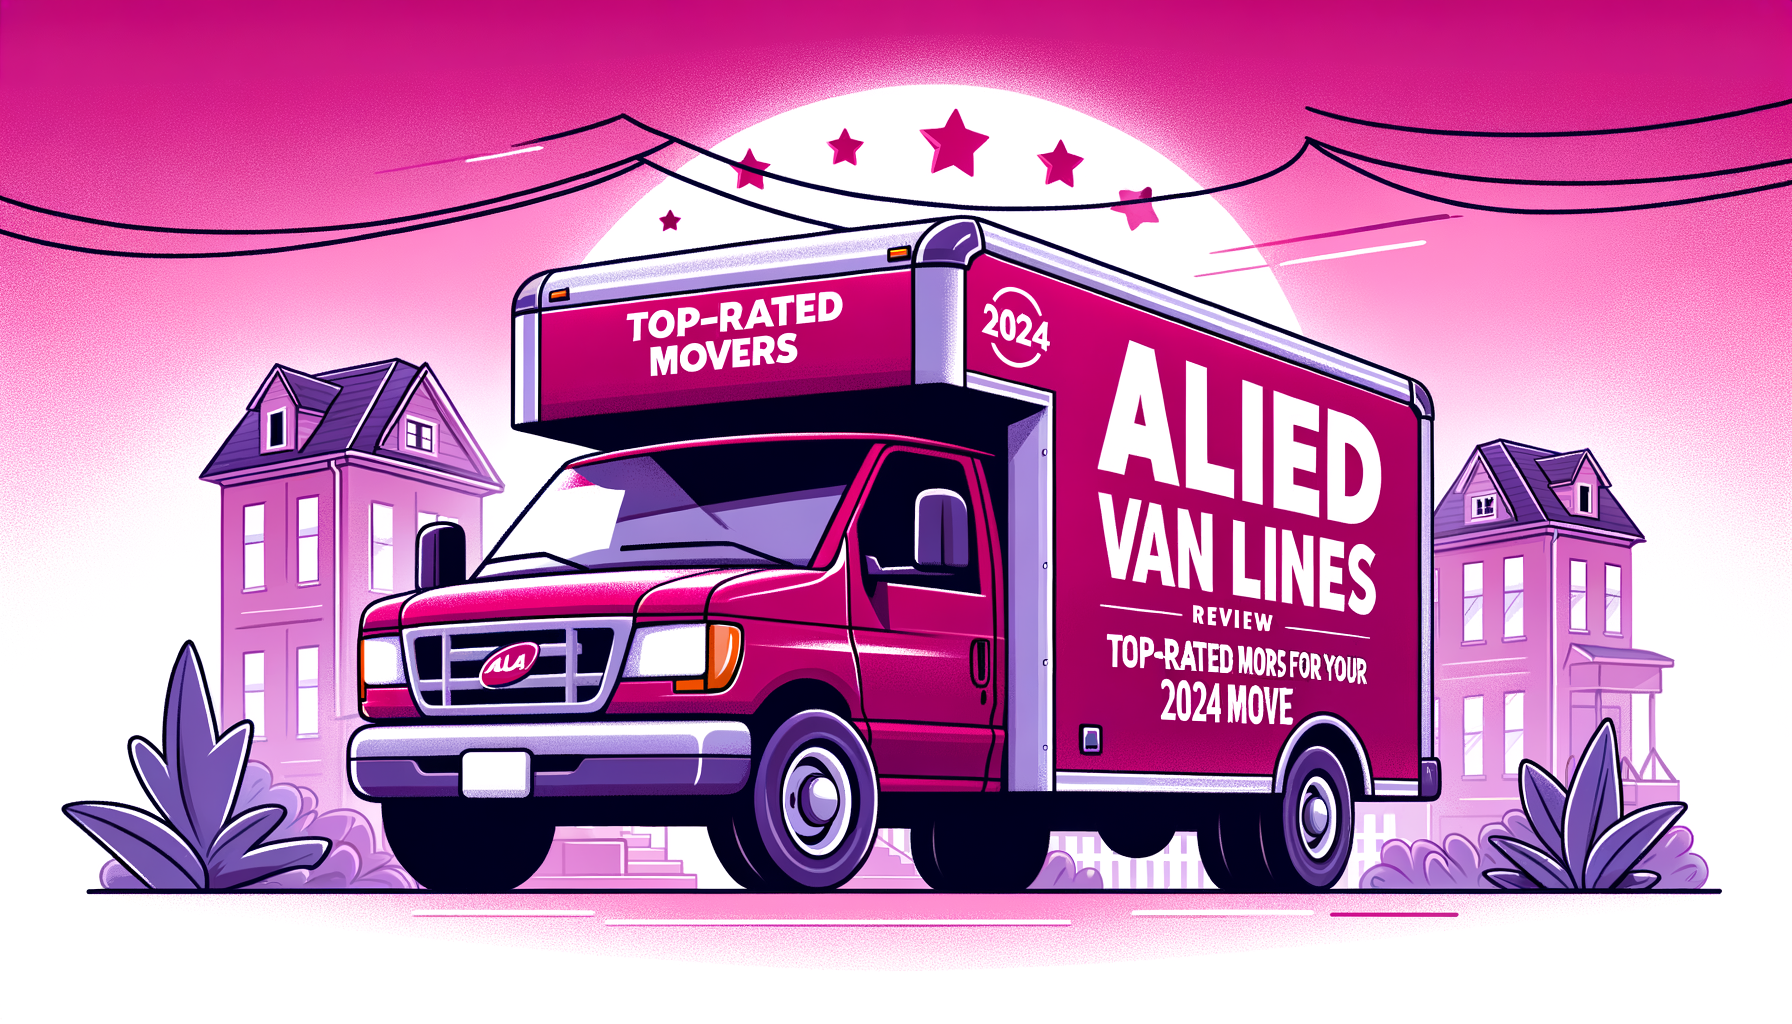 A cartoon-like depiction of a fuschia-colored Allied Van Lines moving truck, symbolizing top-rated moving services for 2024.